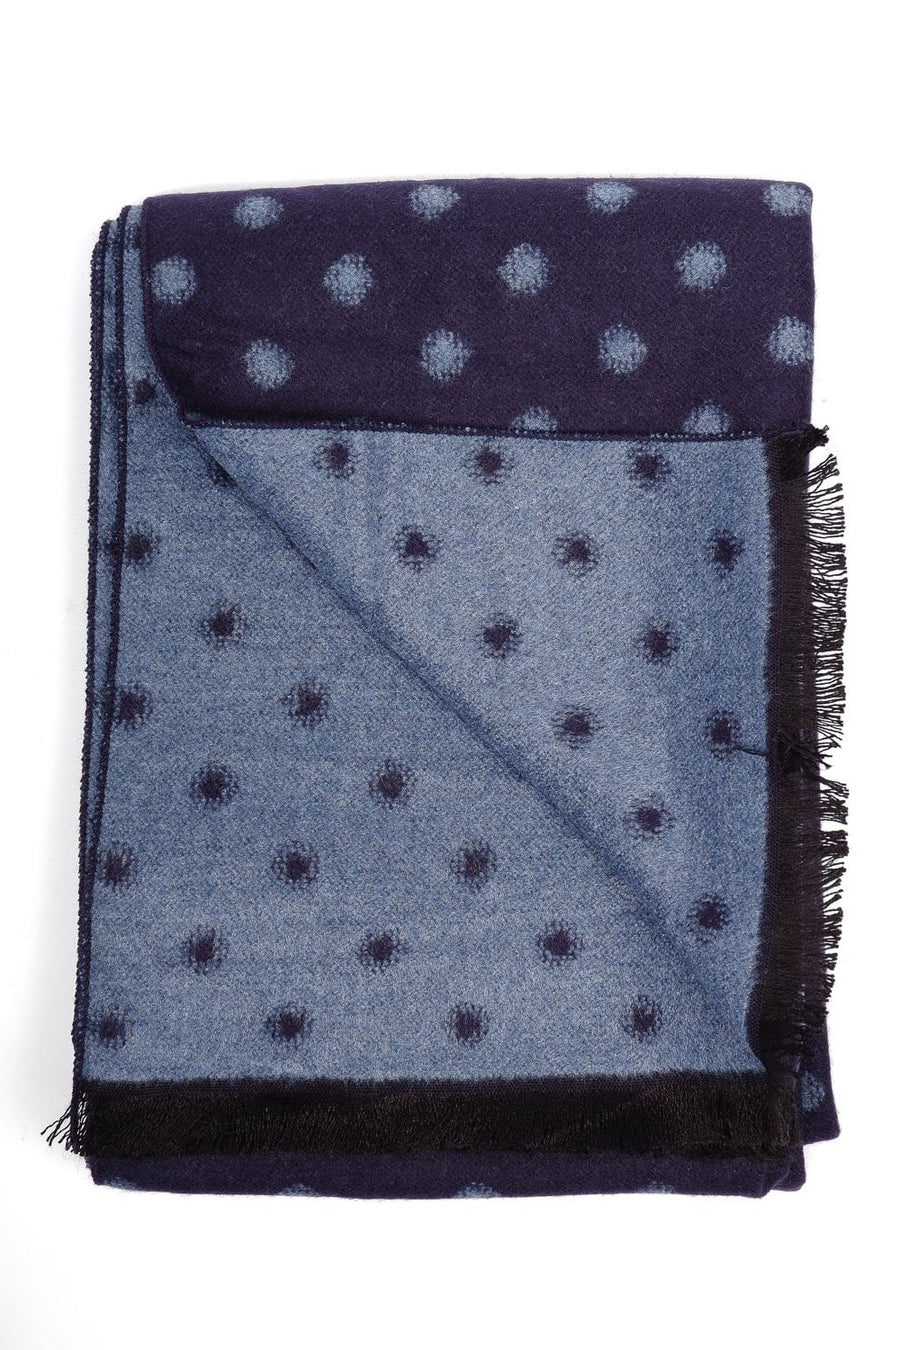 Buy the Remus Uomo Spotted Scarf in Navy at Intro. Spend £50 for free UK delivery. Official stockists. We ship worldwide.